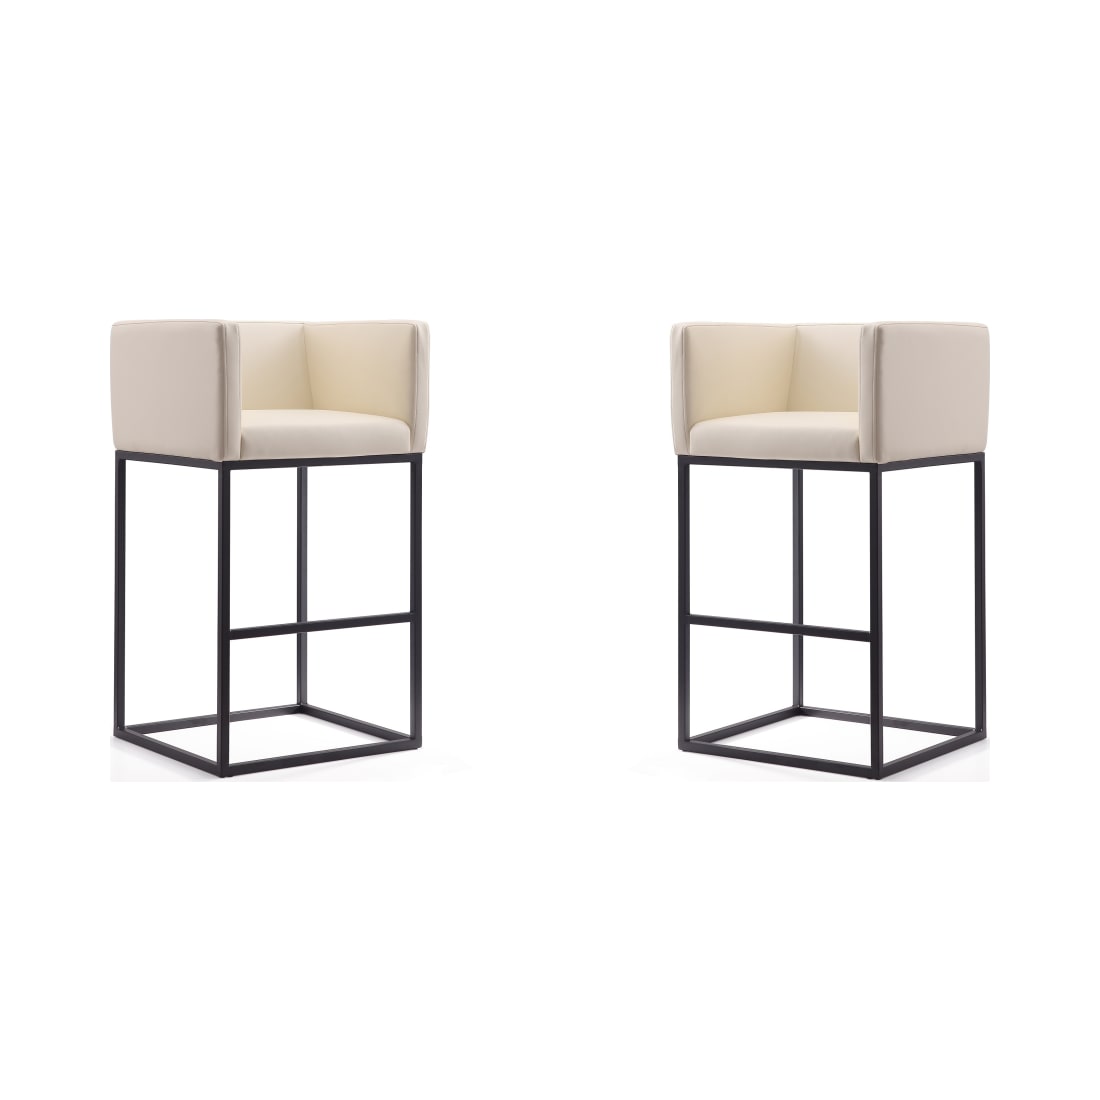 Embassy Barstool in Cream and Black (Set of 2)